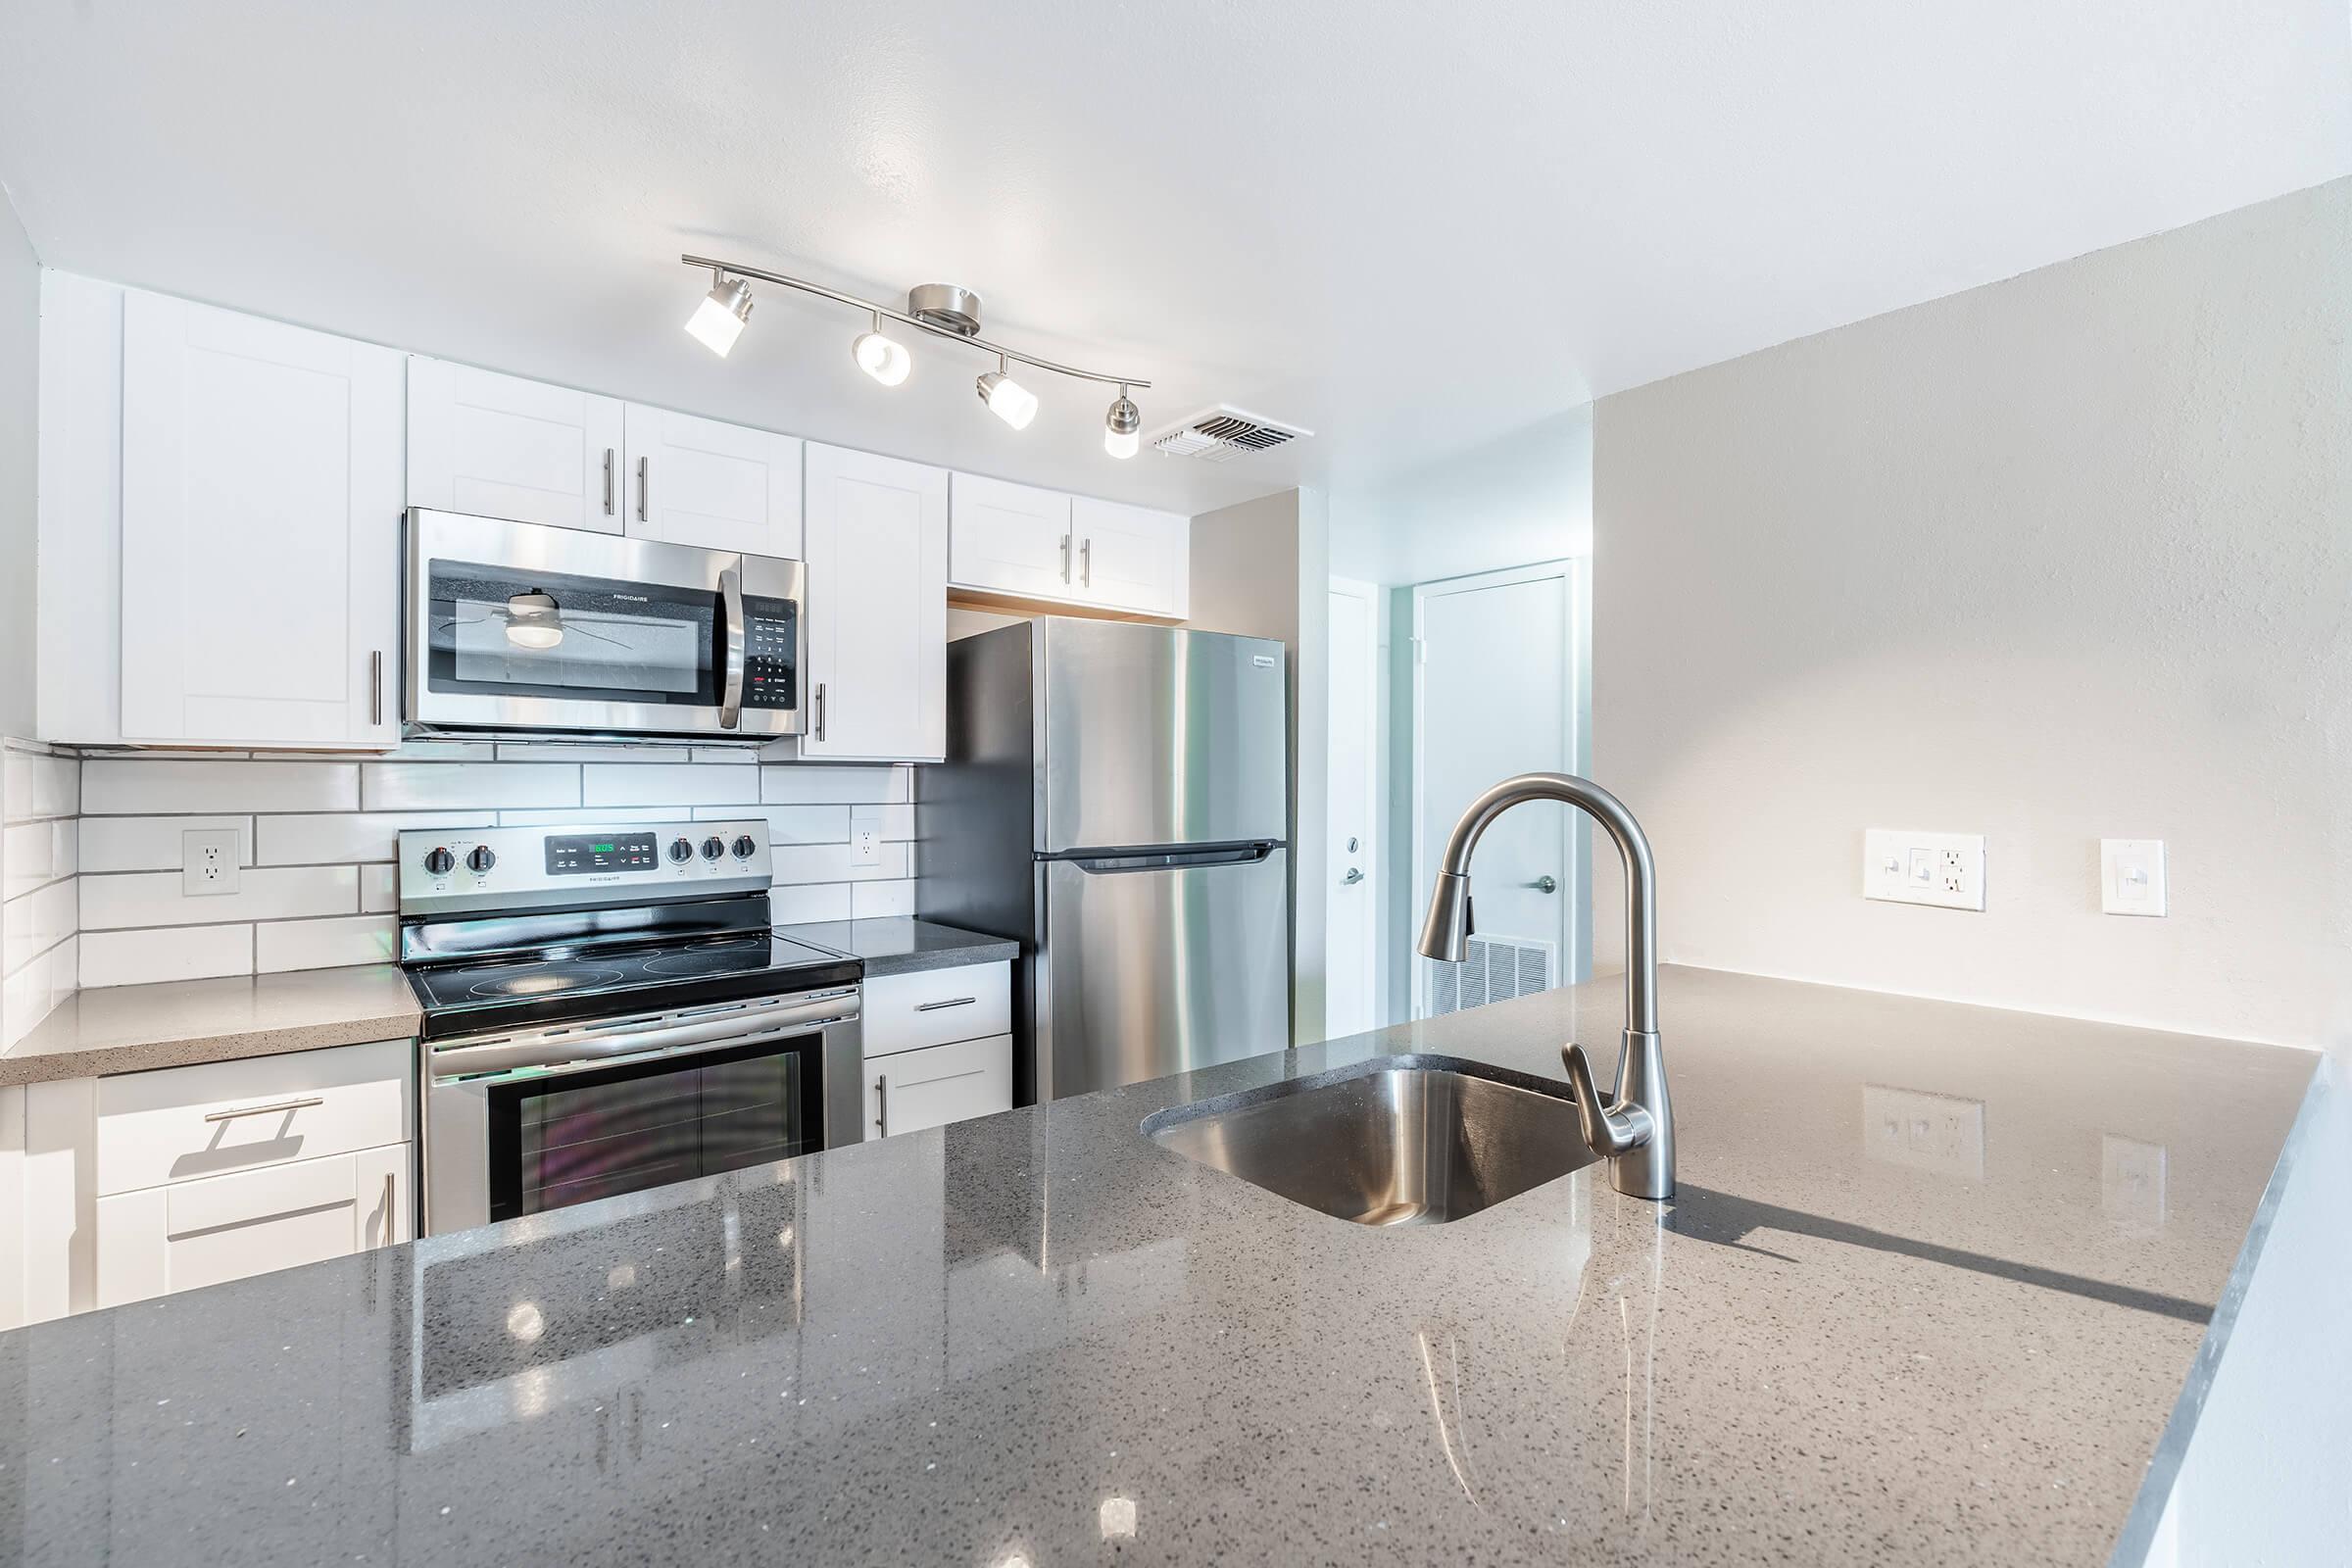 Modern renovated kitchen with large quartz island, white cabinets, and stainless steel appliances